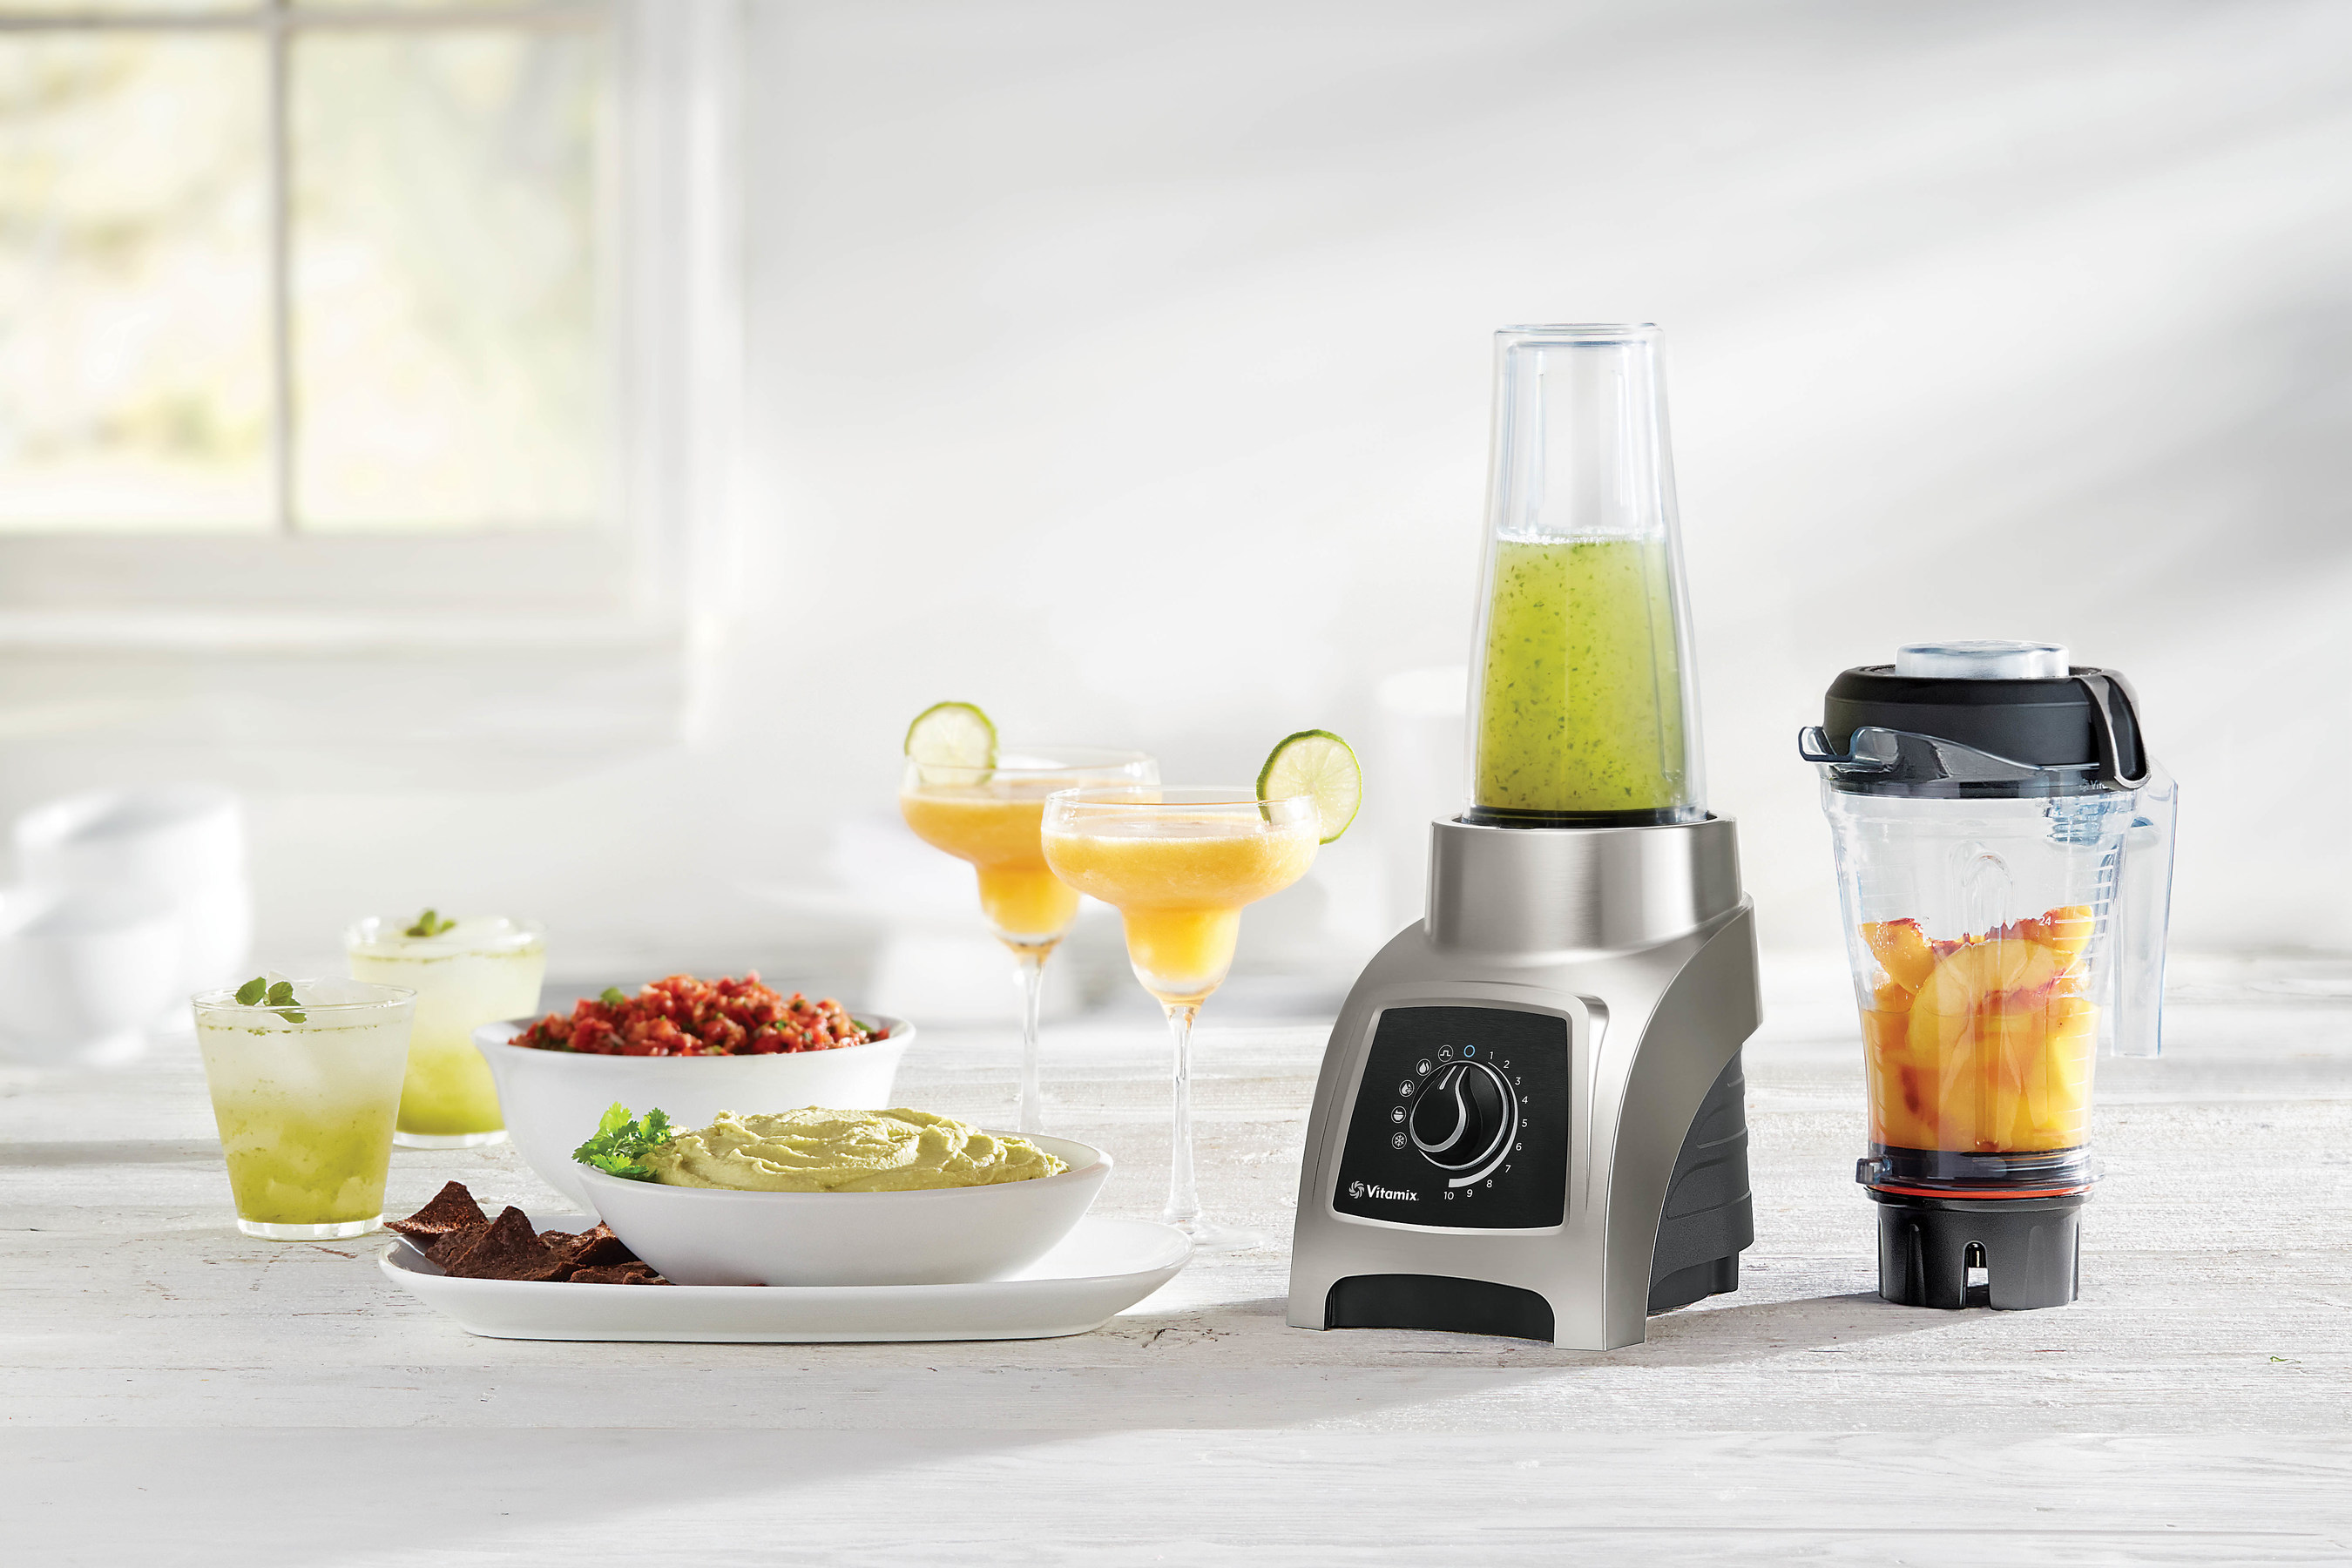 The Vitamix S55, a high-performance personal blender, takes the guesswork out of blending. Equipped with two unique containers and four pre-programmed settings for Smoothies, Power Blends, Dips & Spreads and Frozen Desserts, plus an automatic shut-off, the S55 makes it easy to achieve perfect results for every meal of the day.